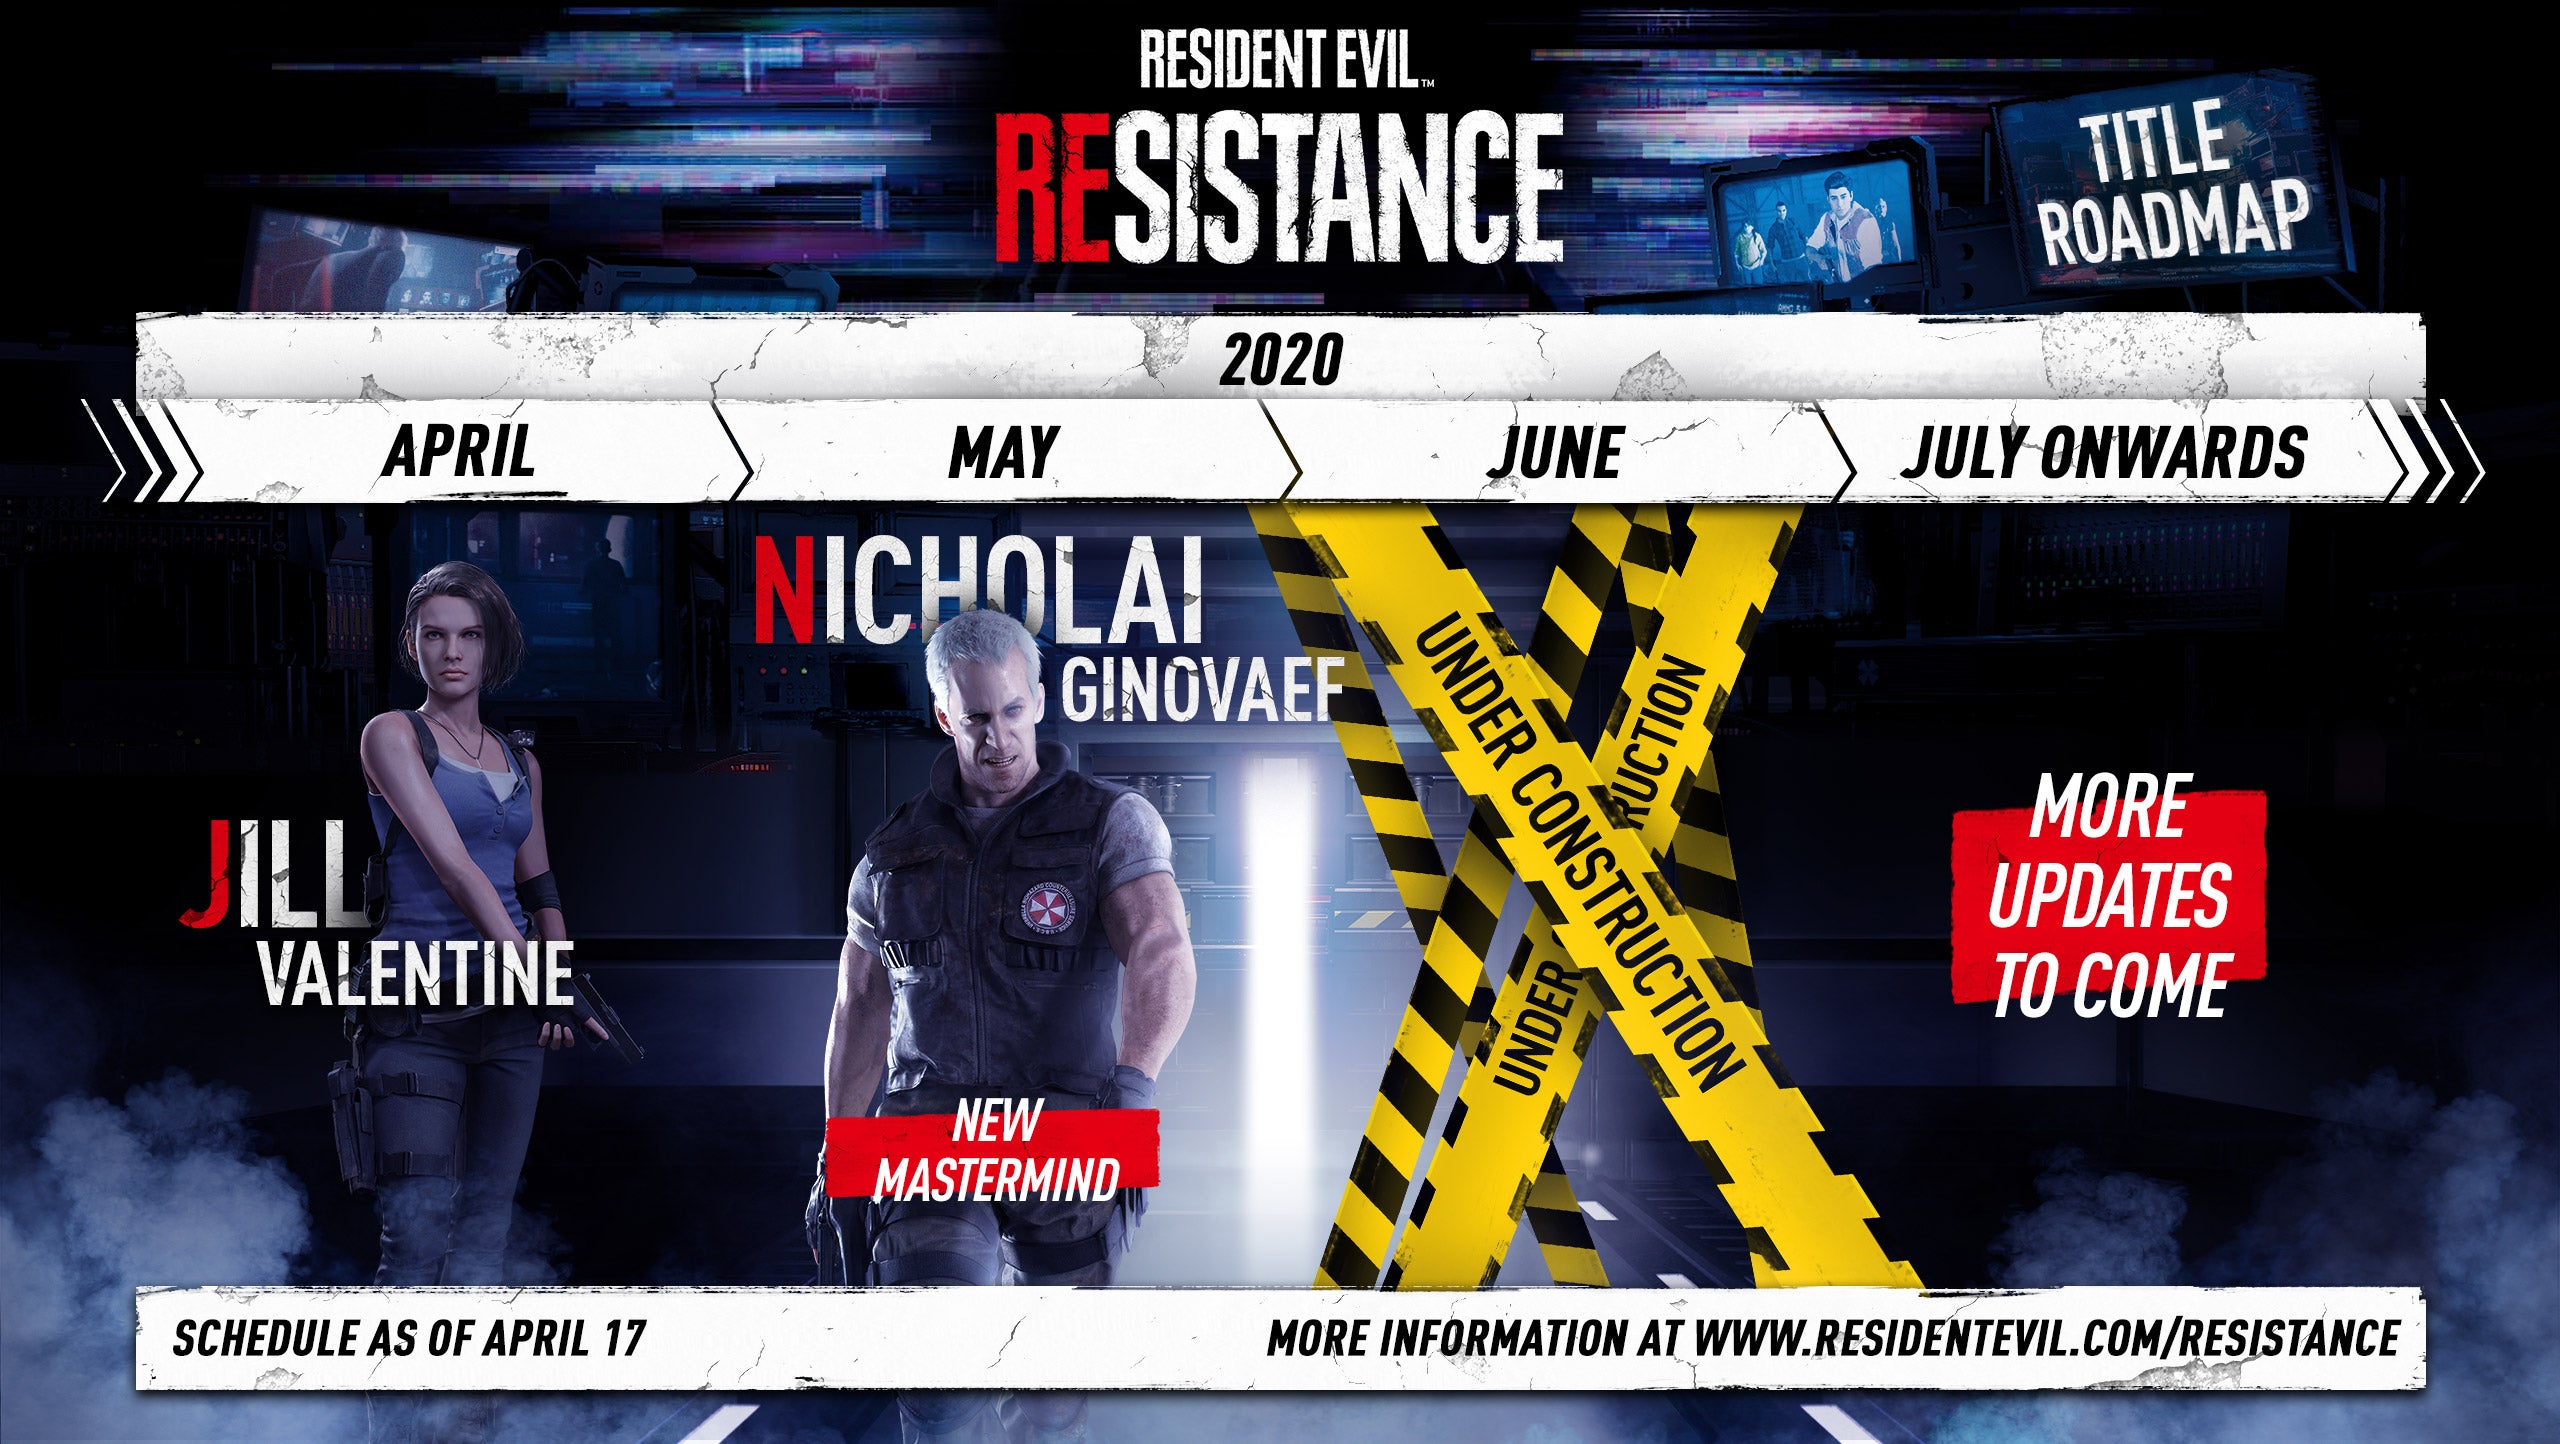 Image for Resident Evil Resistance adds Nicholai Ginovaef as a Mastermind in May